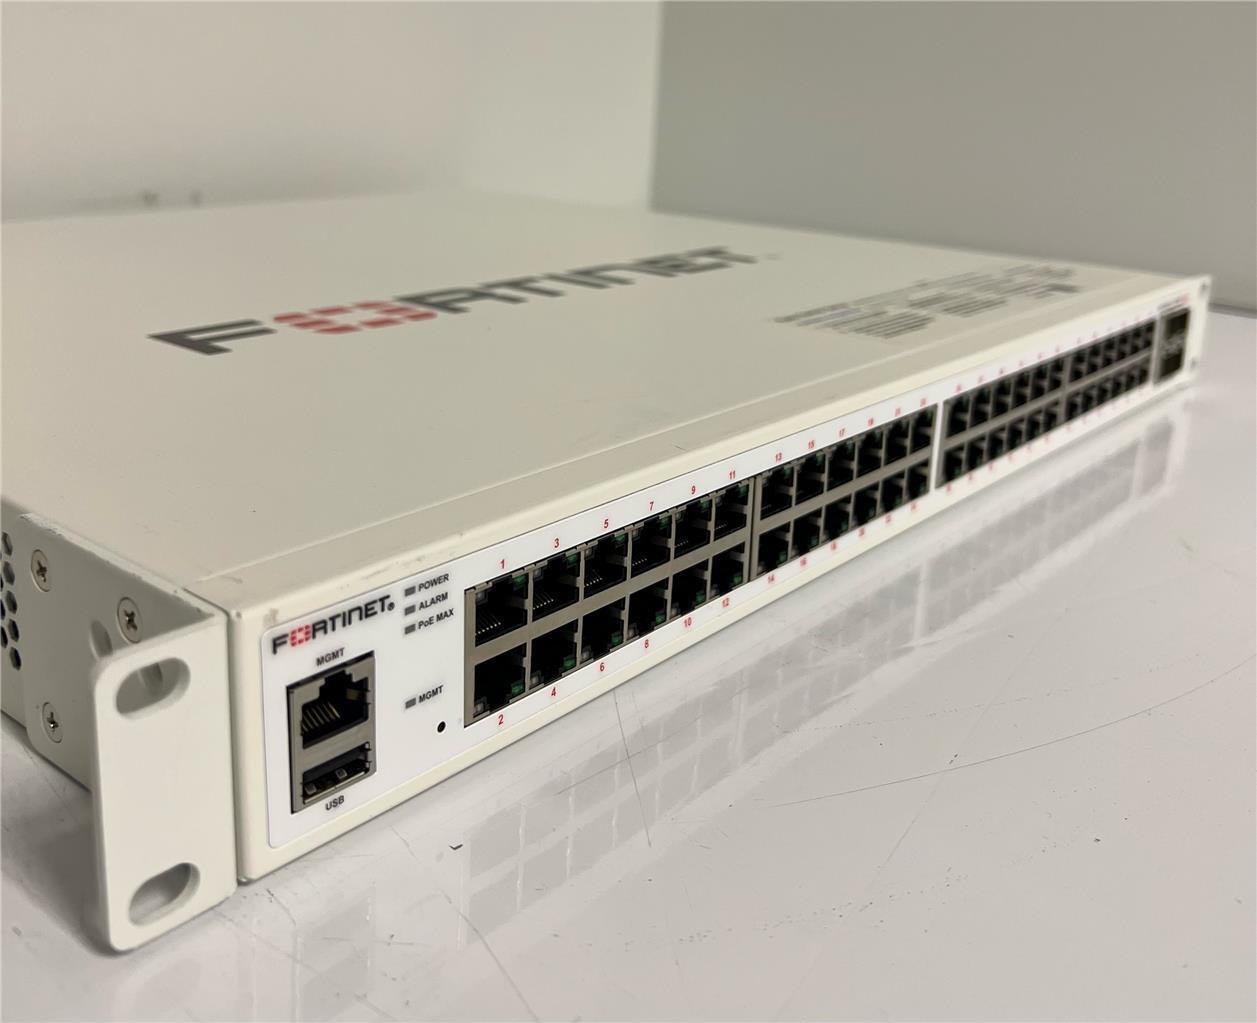 Fortinet FortiSwitch 448E-POE - switch - 48 ports (FS-448E-POE)